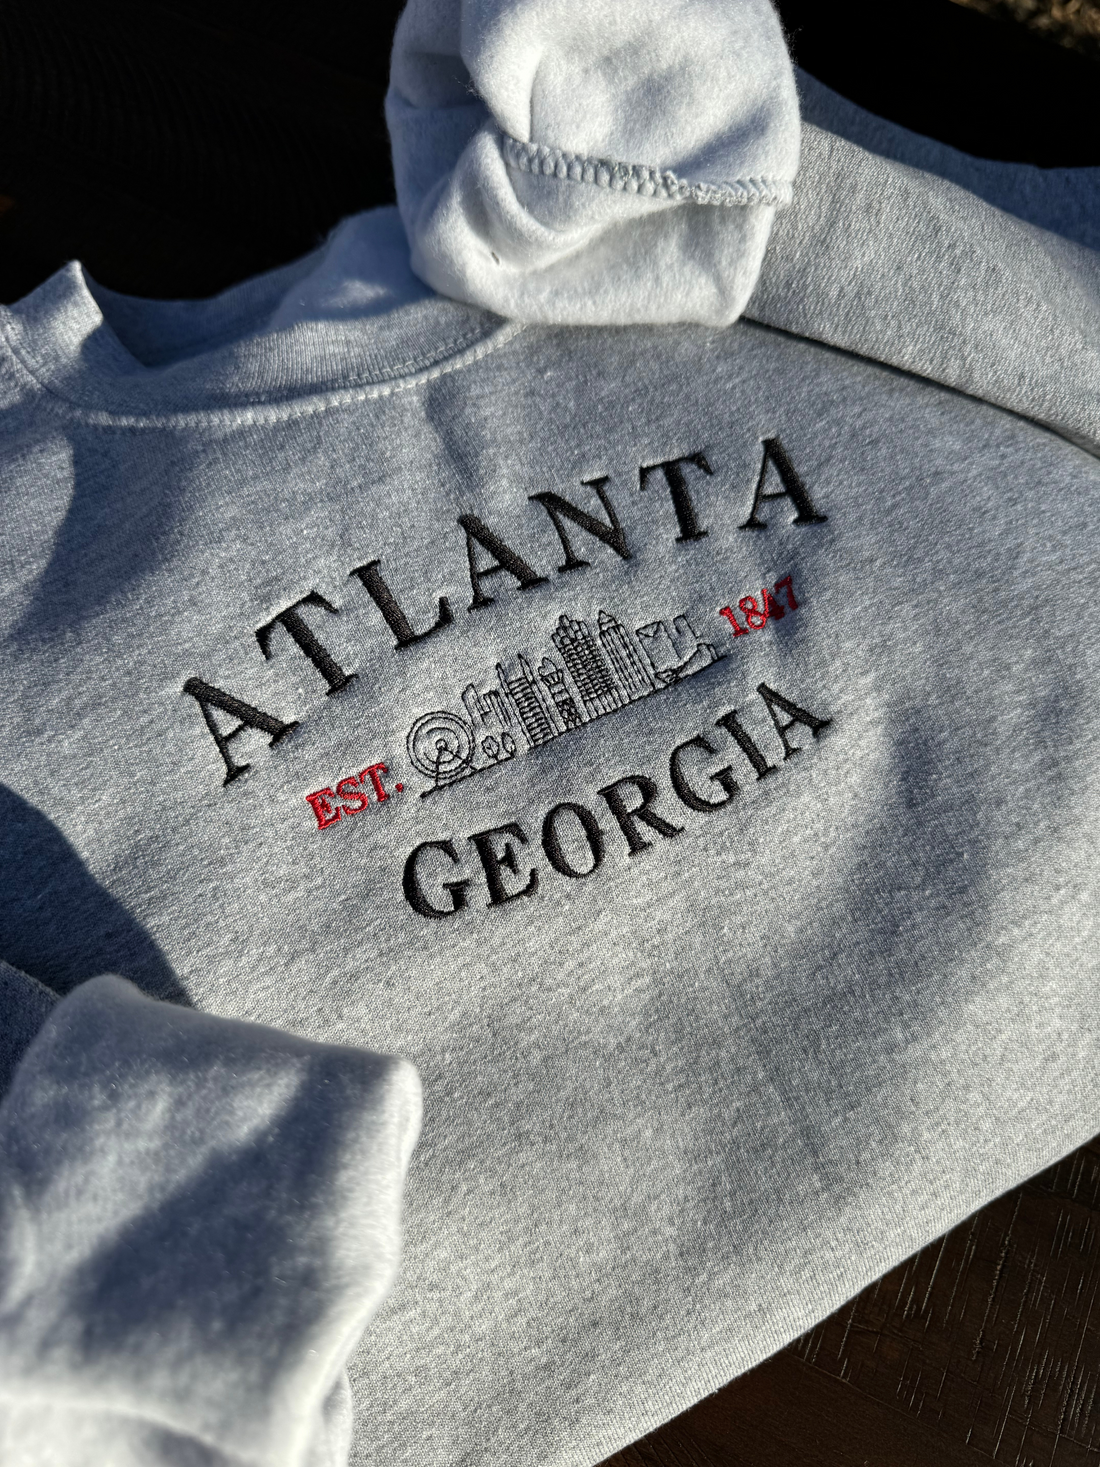 MiddleGrounds-Atlanta-apparel-and-clothing-Georgia-state-outline-sweater-urban-branded-merch